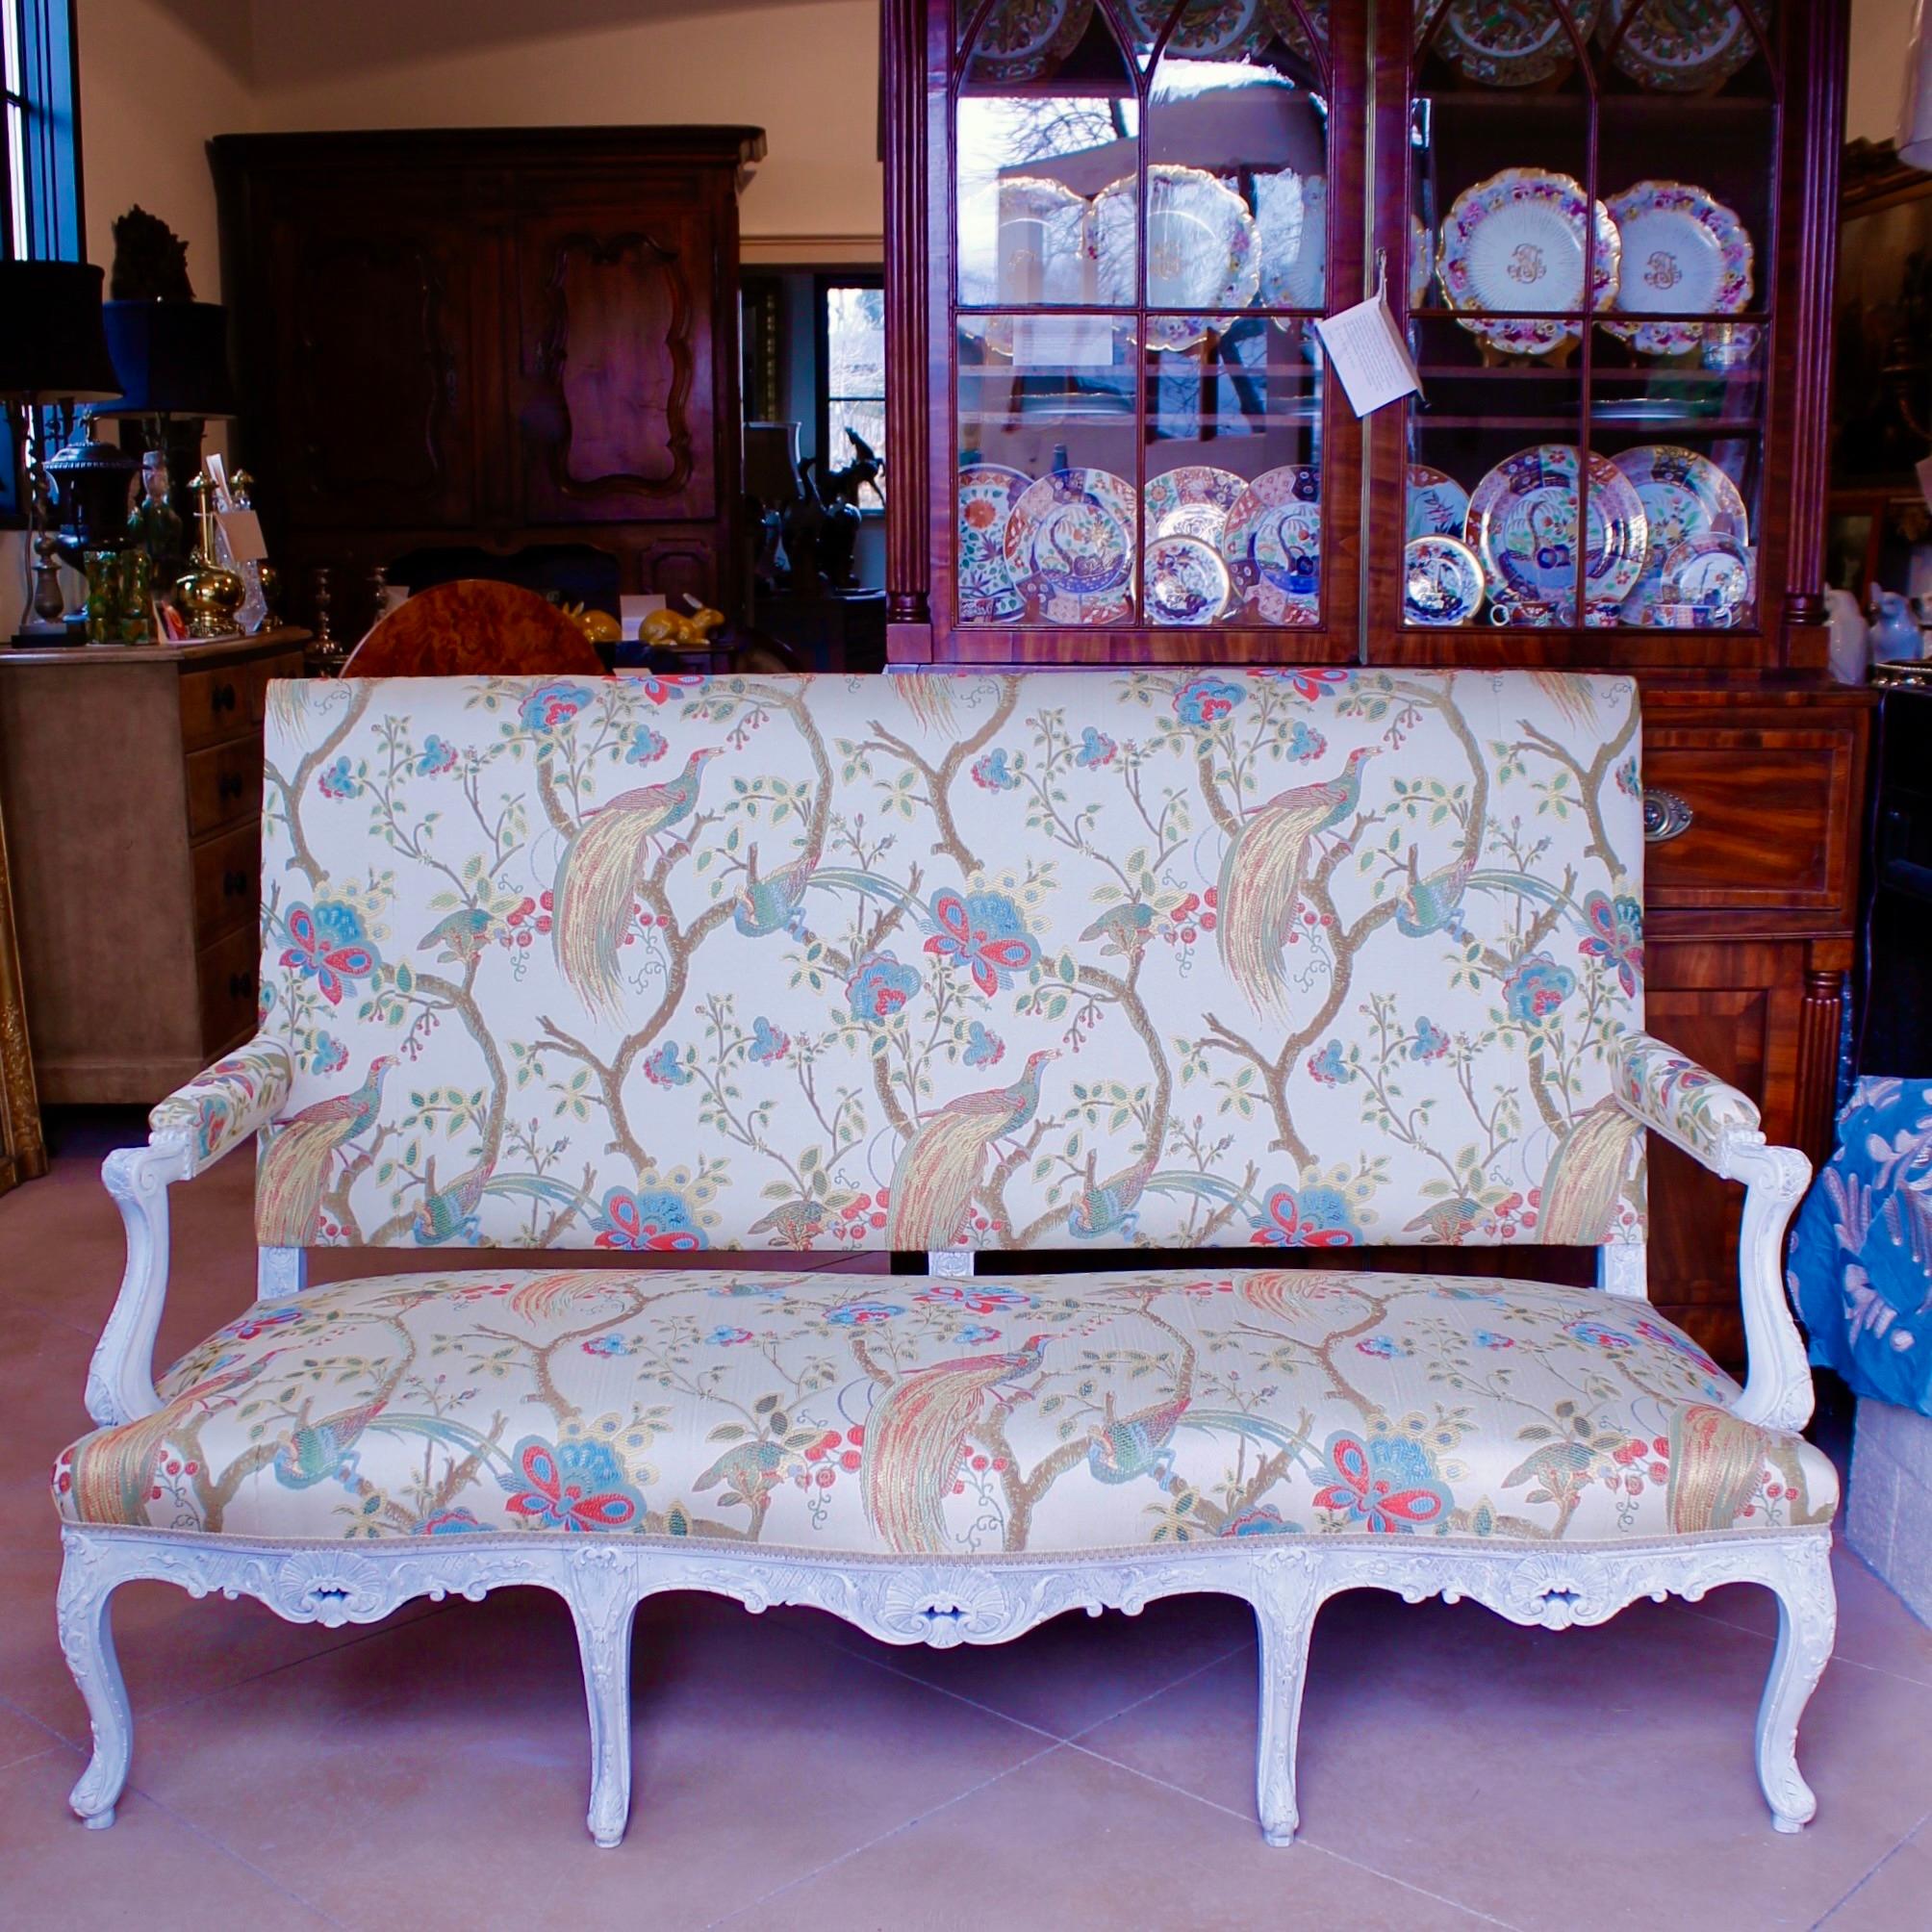 Antique Painted French Régence Style Sofa Or Settee In Good Condition For Sale In Free Union, VA